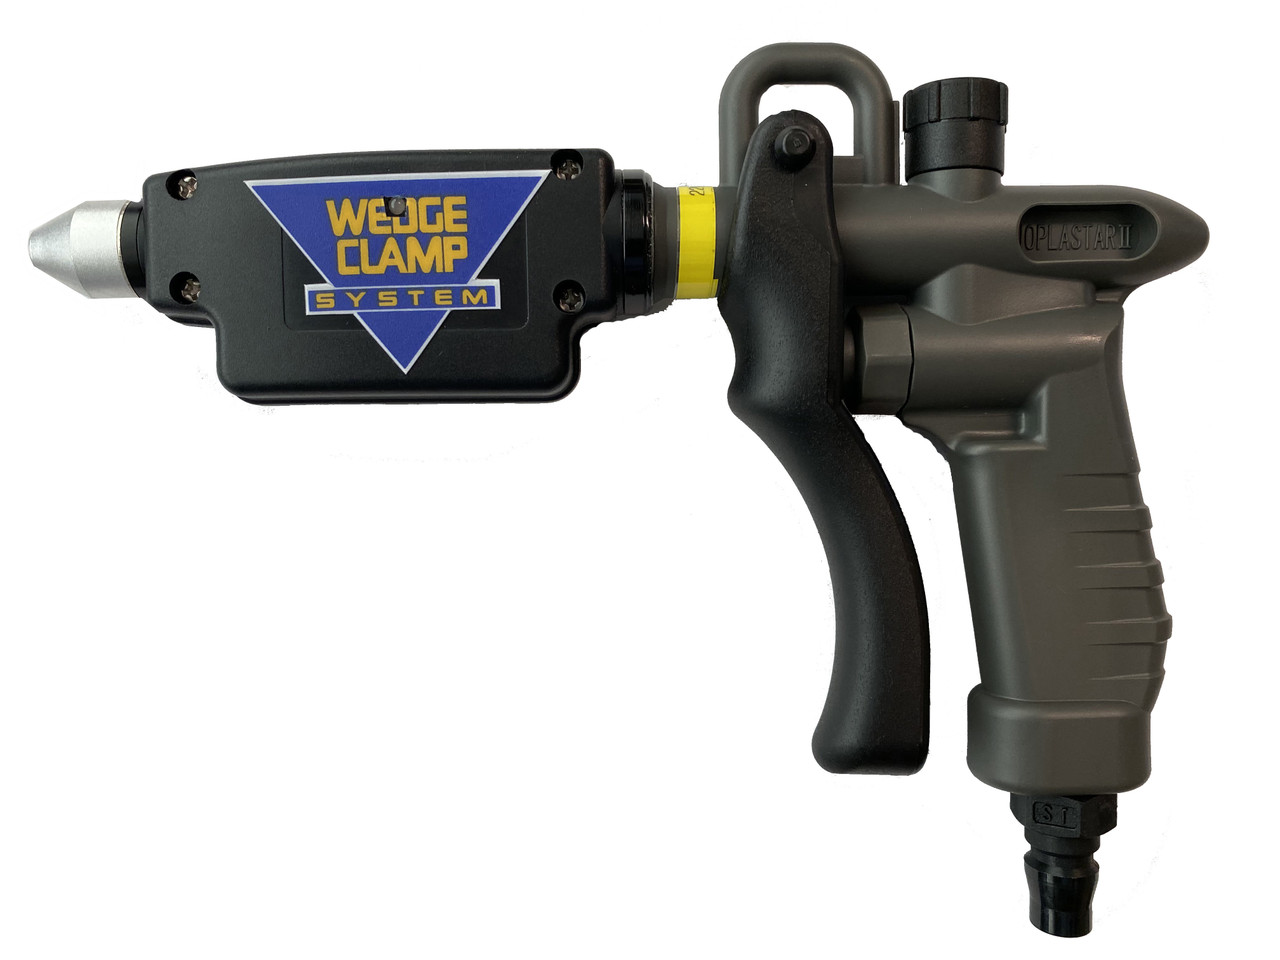 Anti-Static-Gun by Wedge Clamp Systems SG-2000